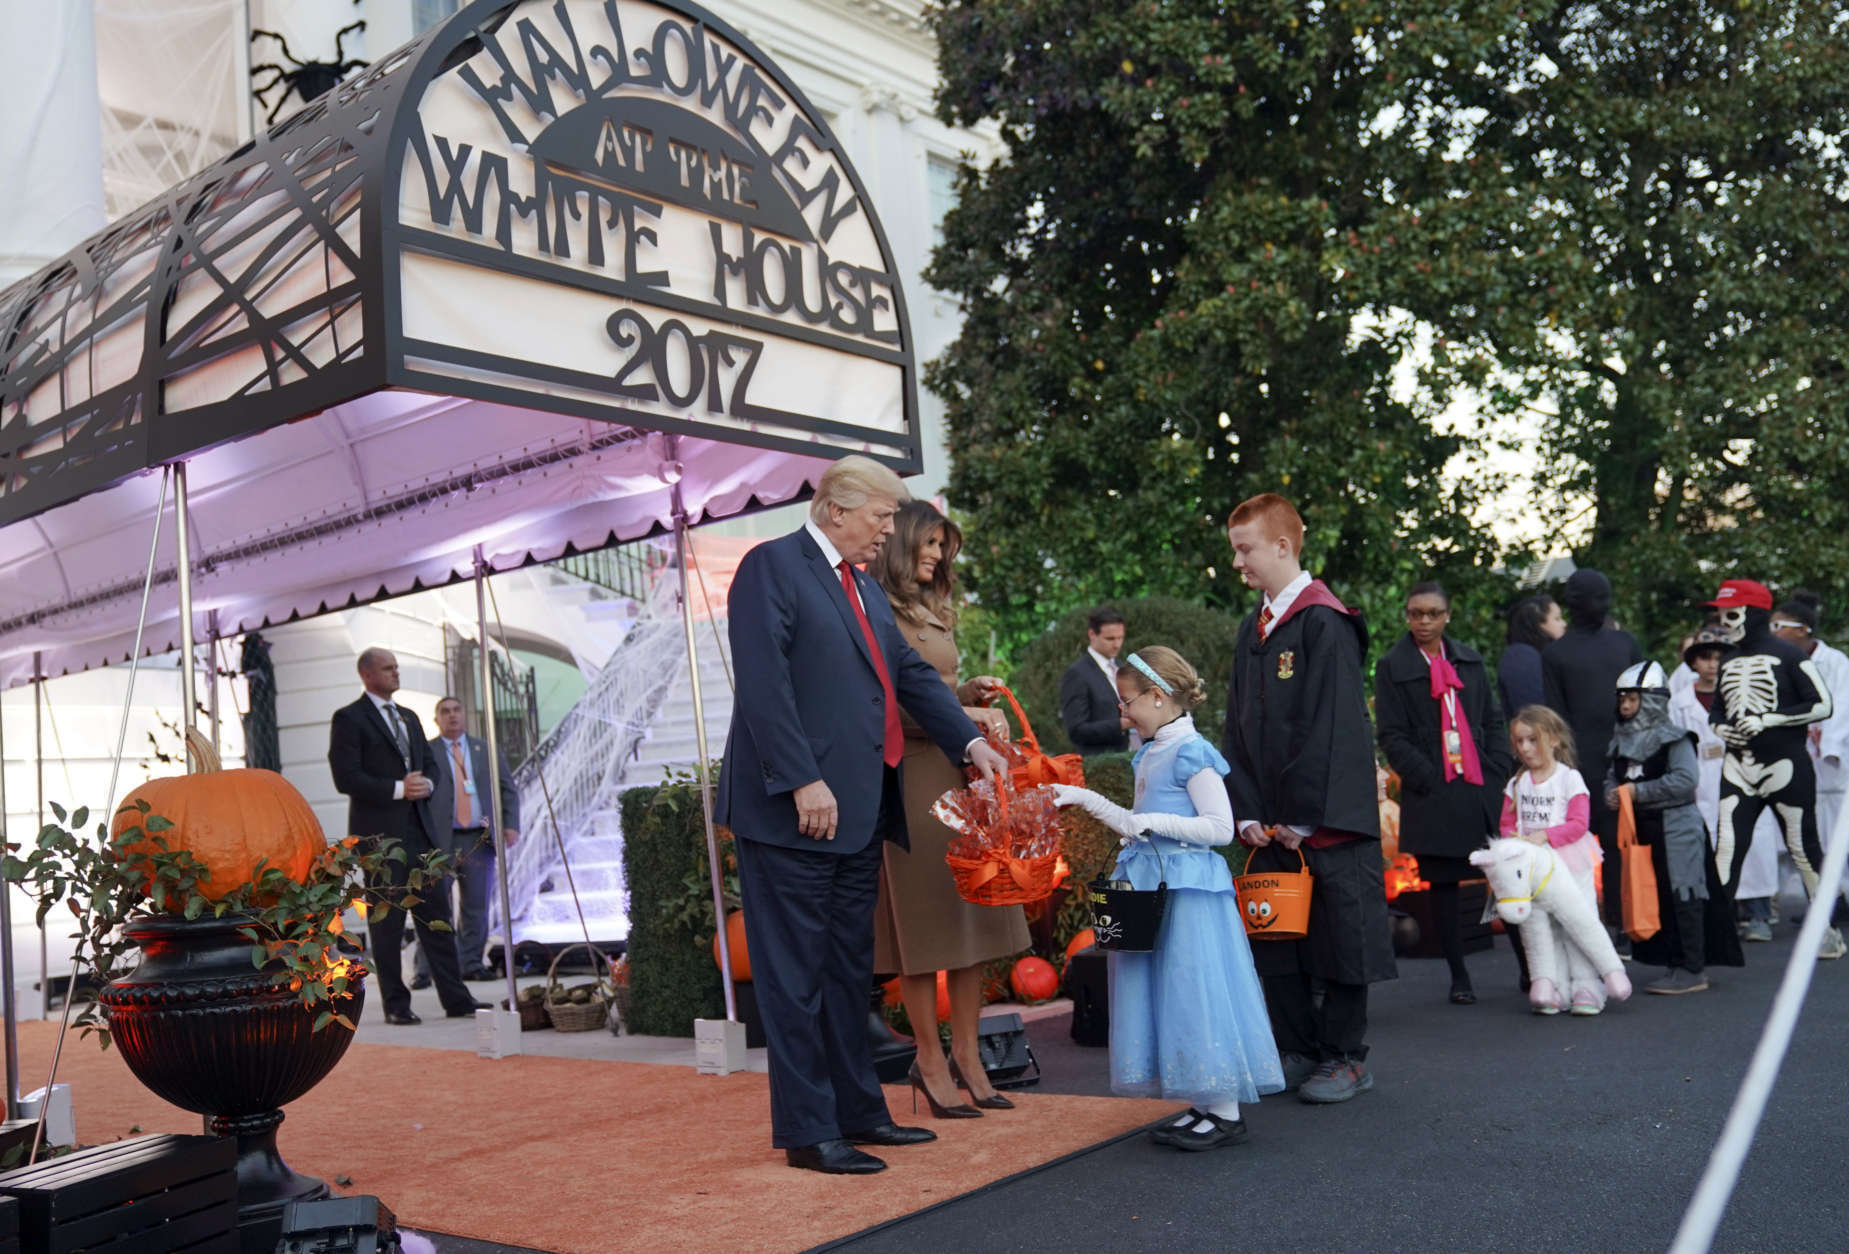 President Donald Trump and first lady Melania Trump hand out treats as they welcome children from the Washington area and children of military families to trick-or-treat for Halloween at the South Lawn of the White House in Washington, Monday, Oct. 30, 2017. (AP Photo/Pablo Martinez Monsivais)